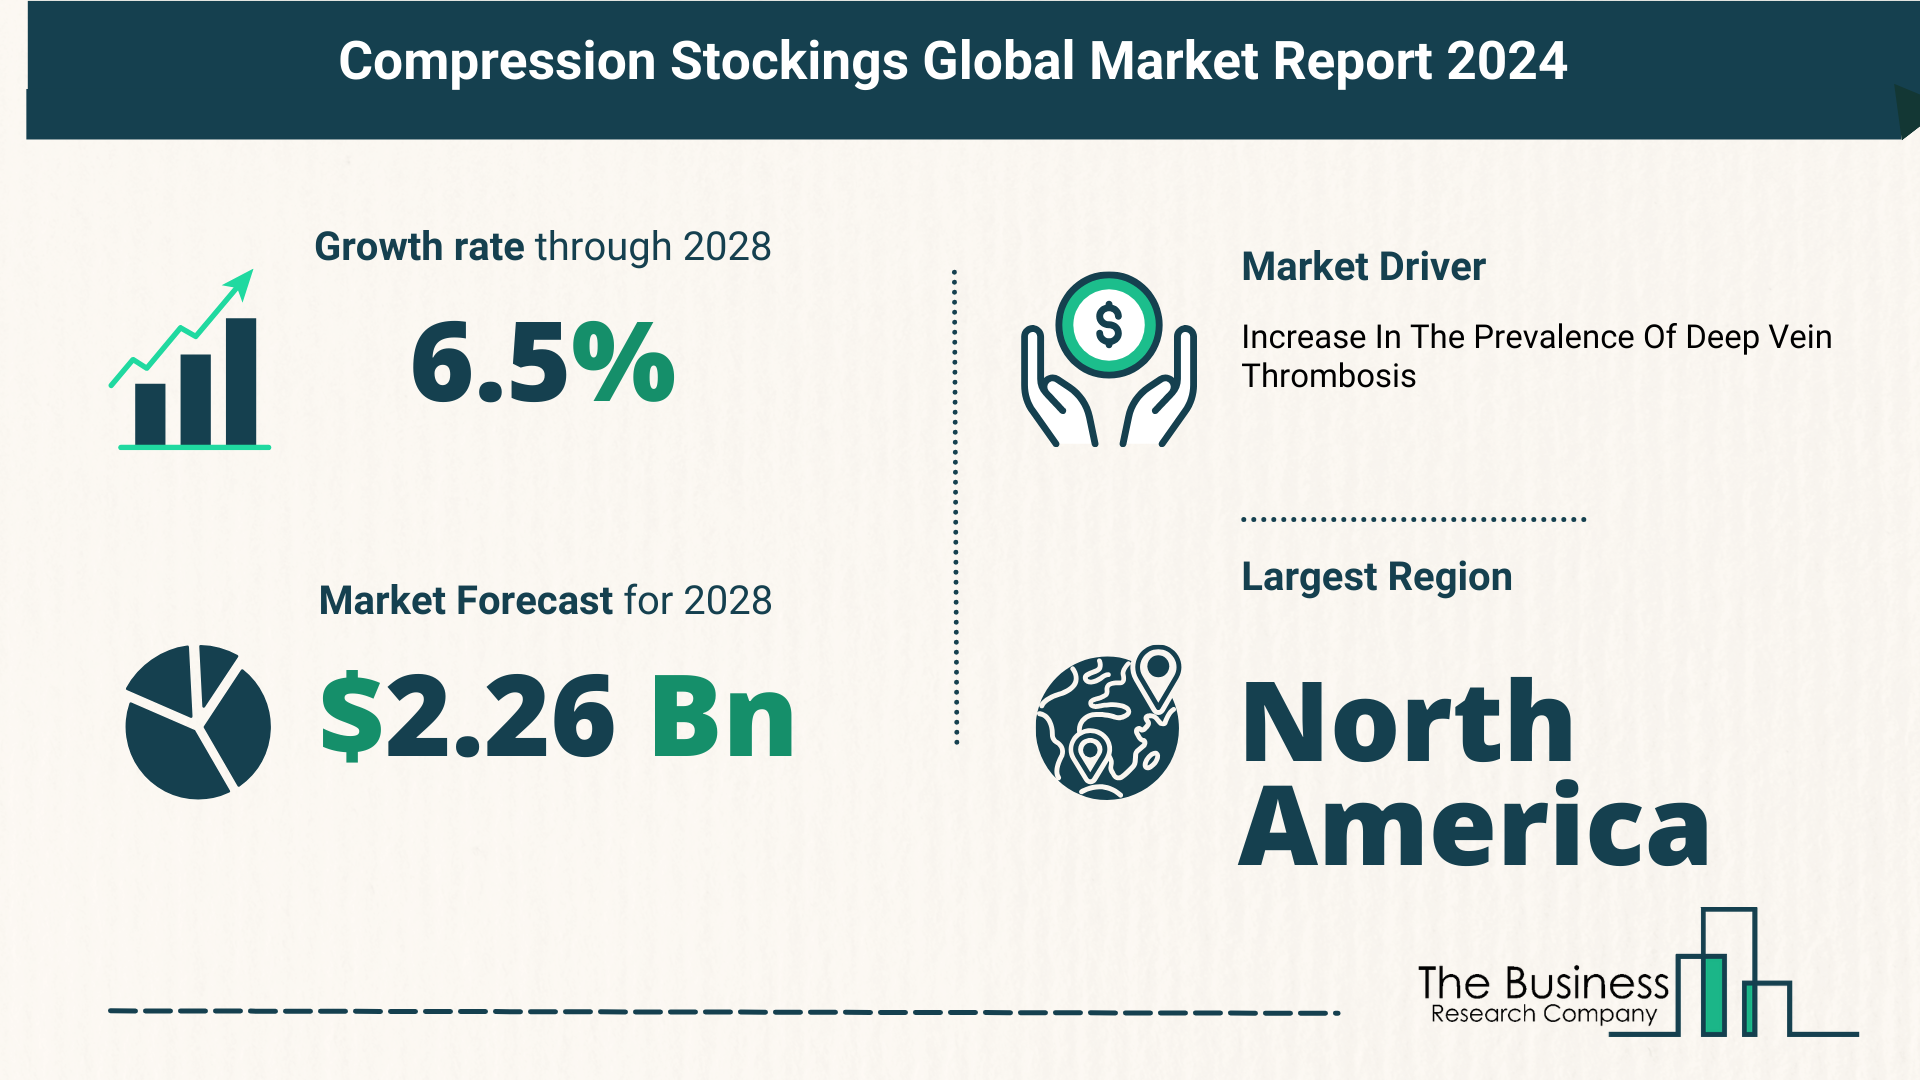 Key Takeaways From The Global Compression Stockings Market Forecast 2024